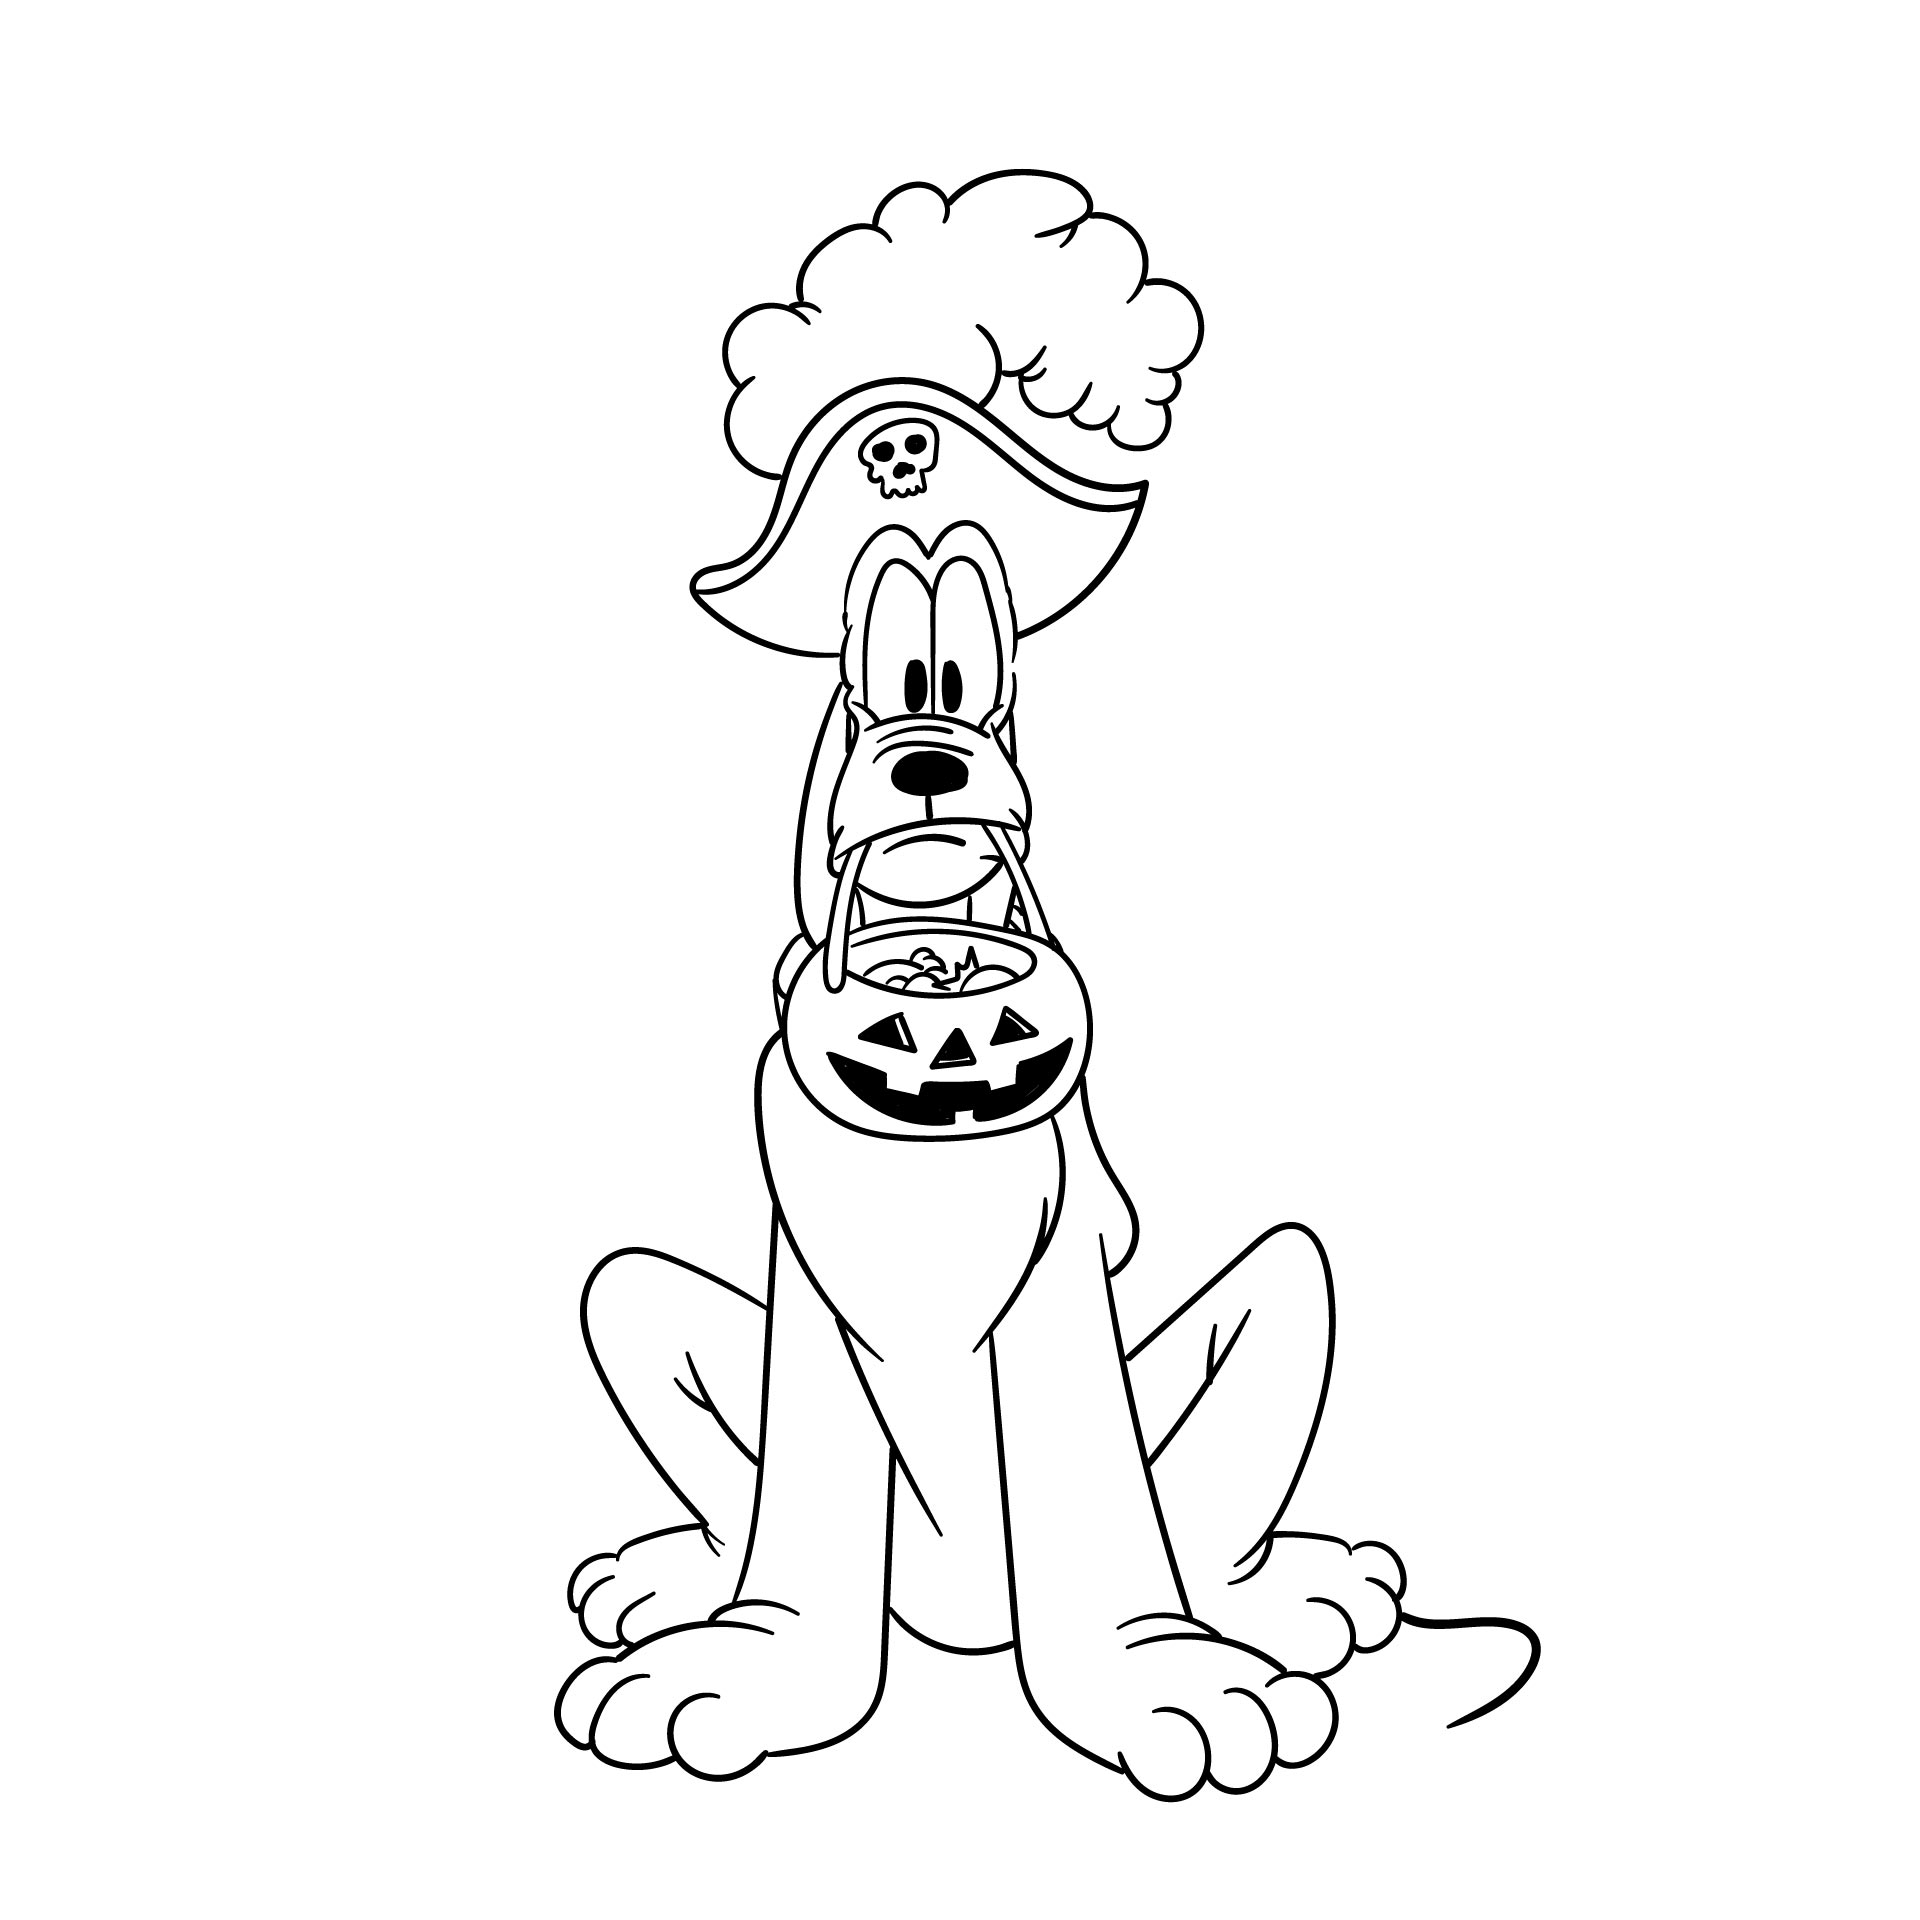 Disney Pluto The Pirate Nife Disney Halloween Coloring Pages Printable